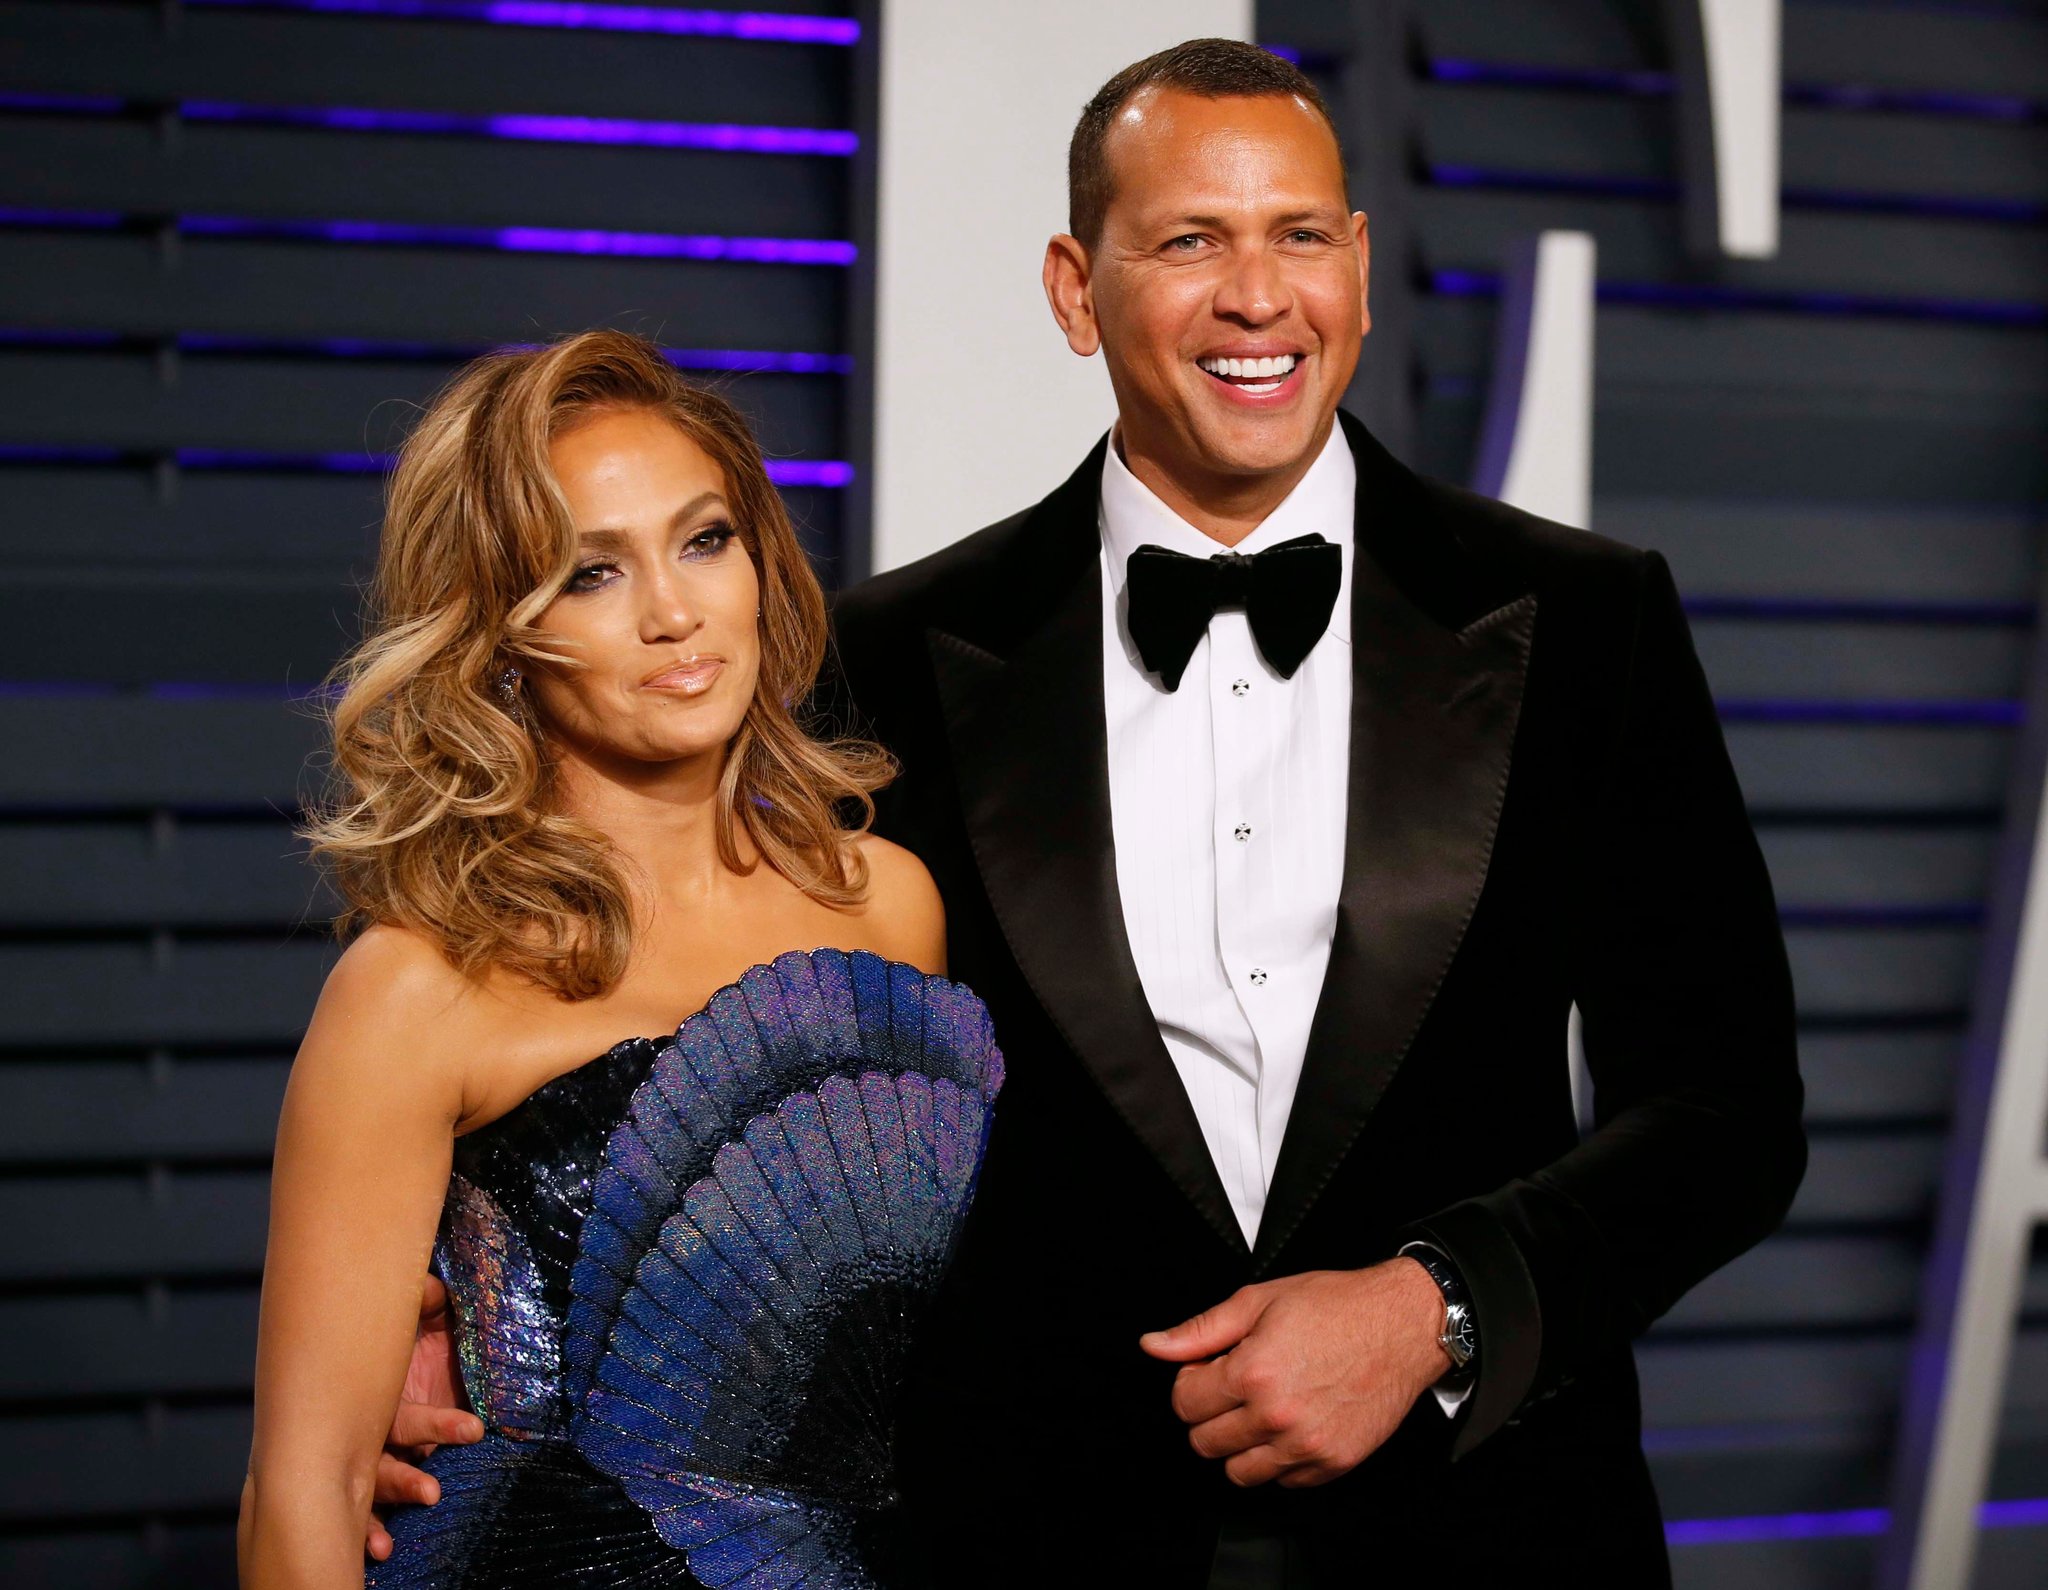 My wedding is in limbo due to COVID-19----Jennifer Lopez cries